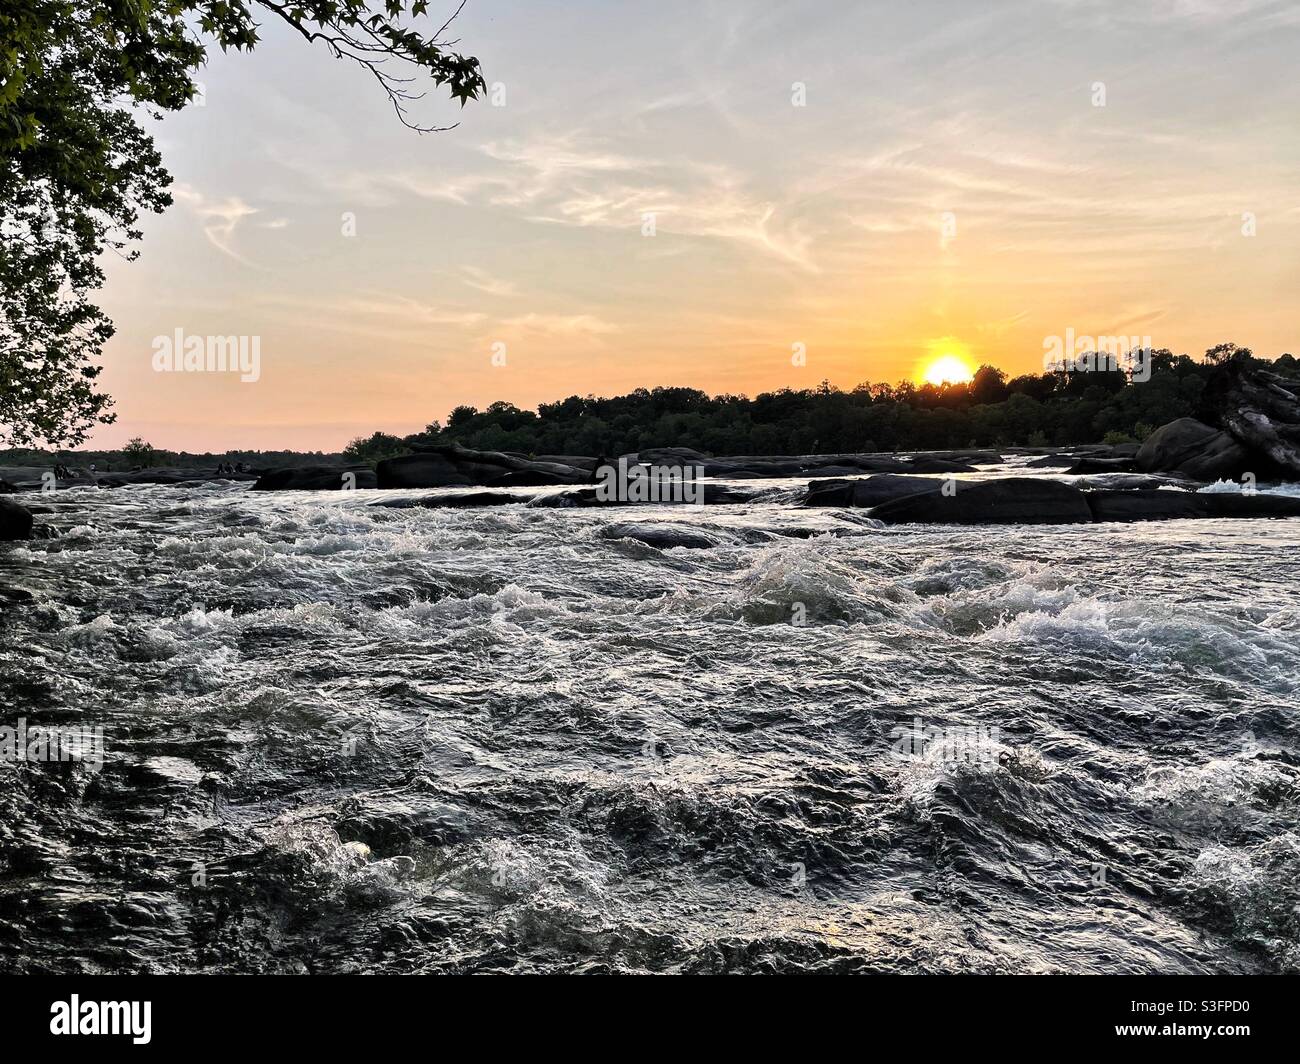 The sunset over the whitewater of the James River in Richmond, Virginia. Stock Photo